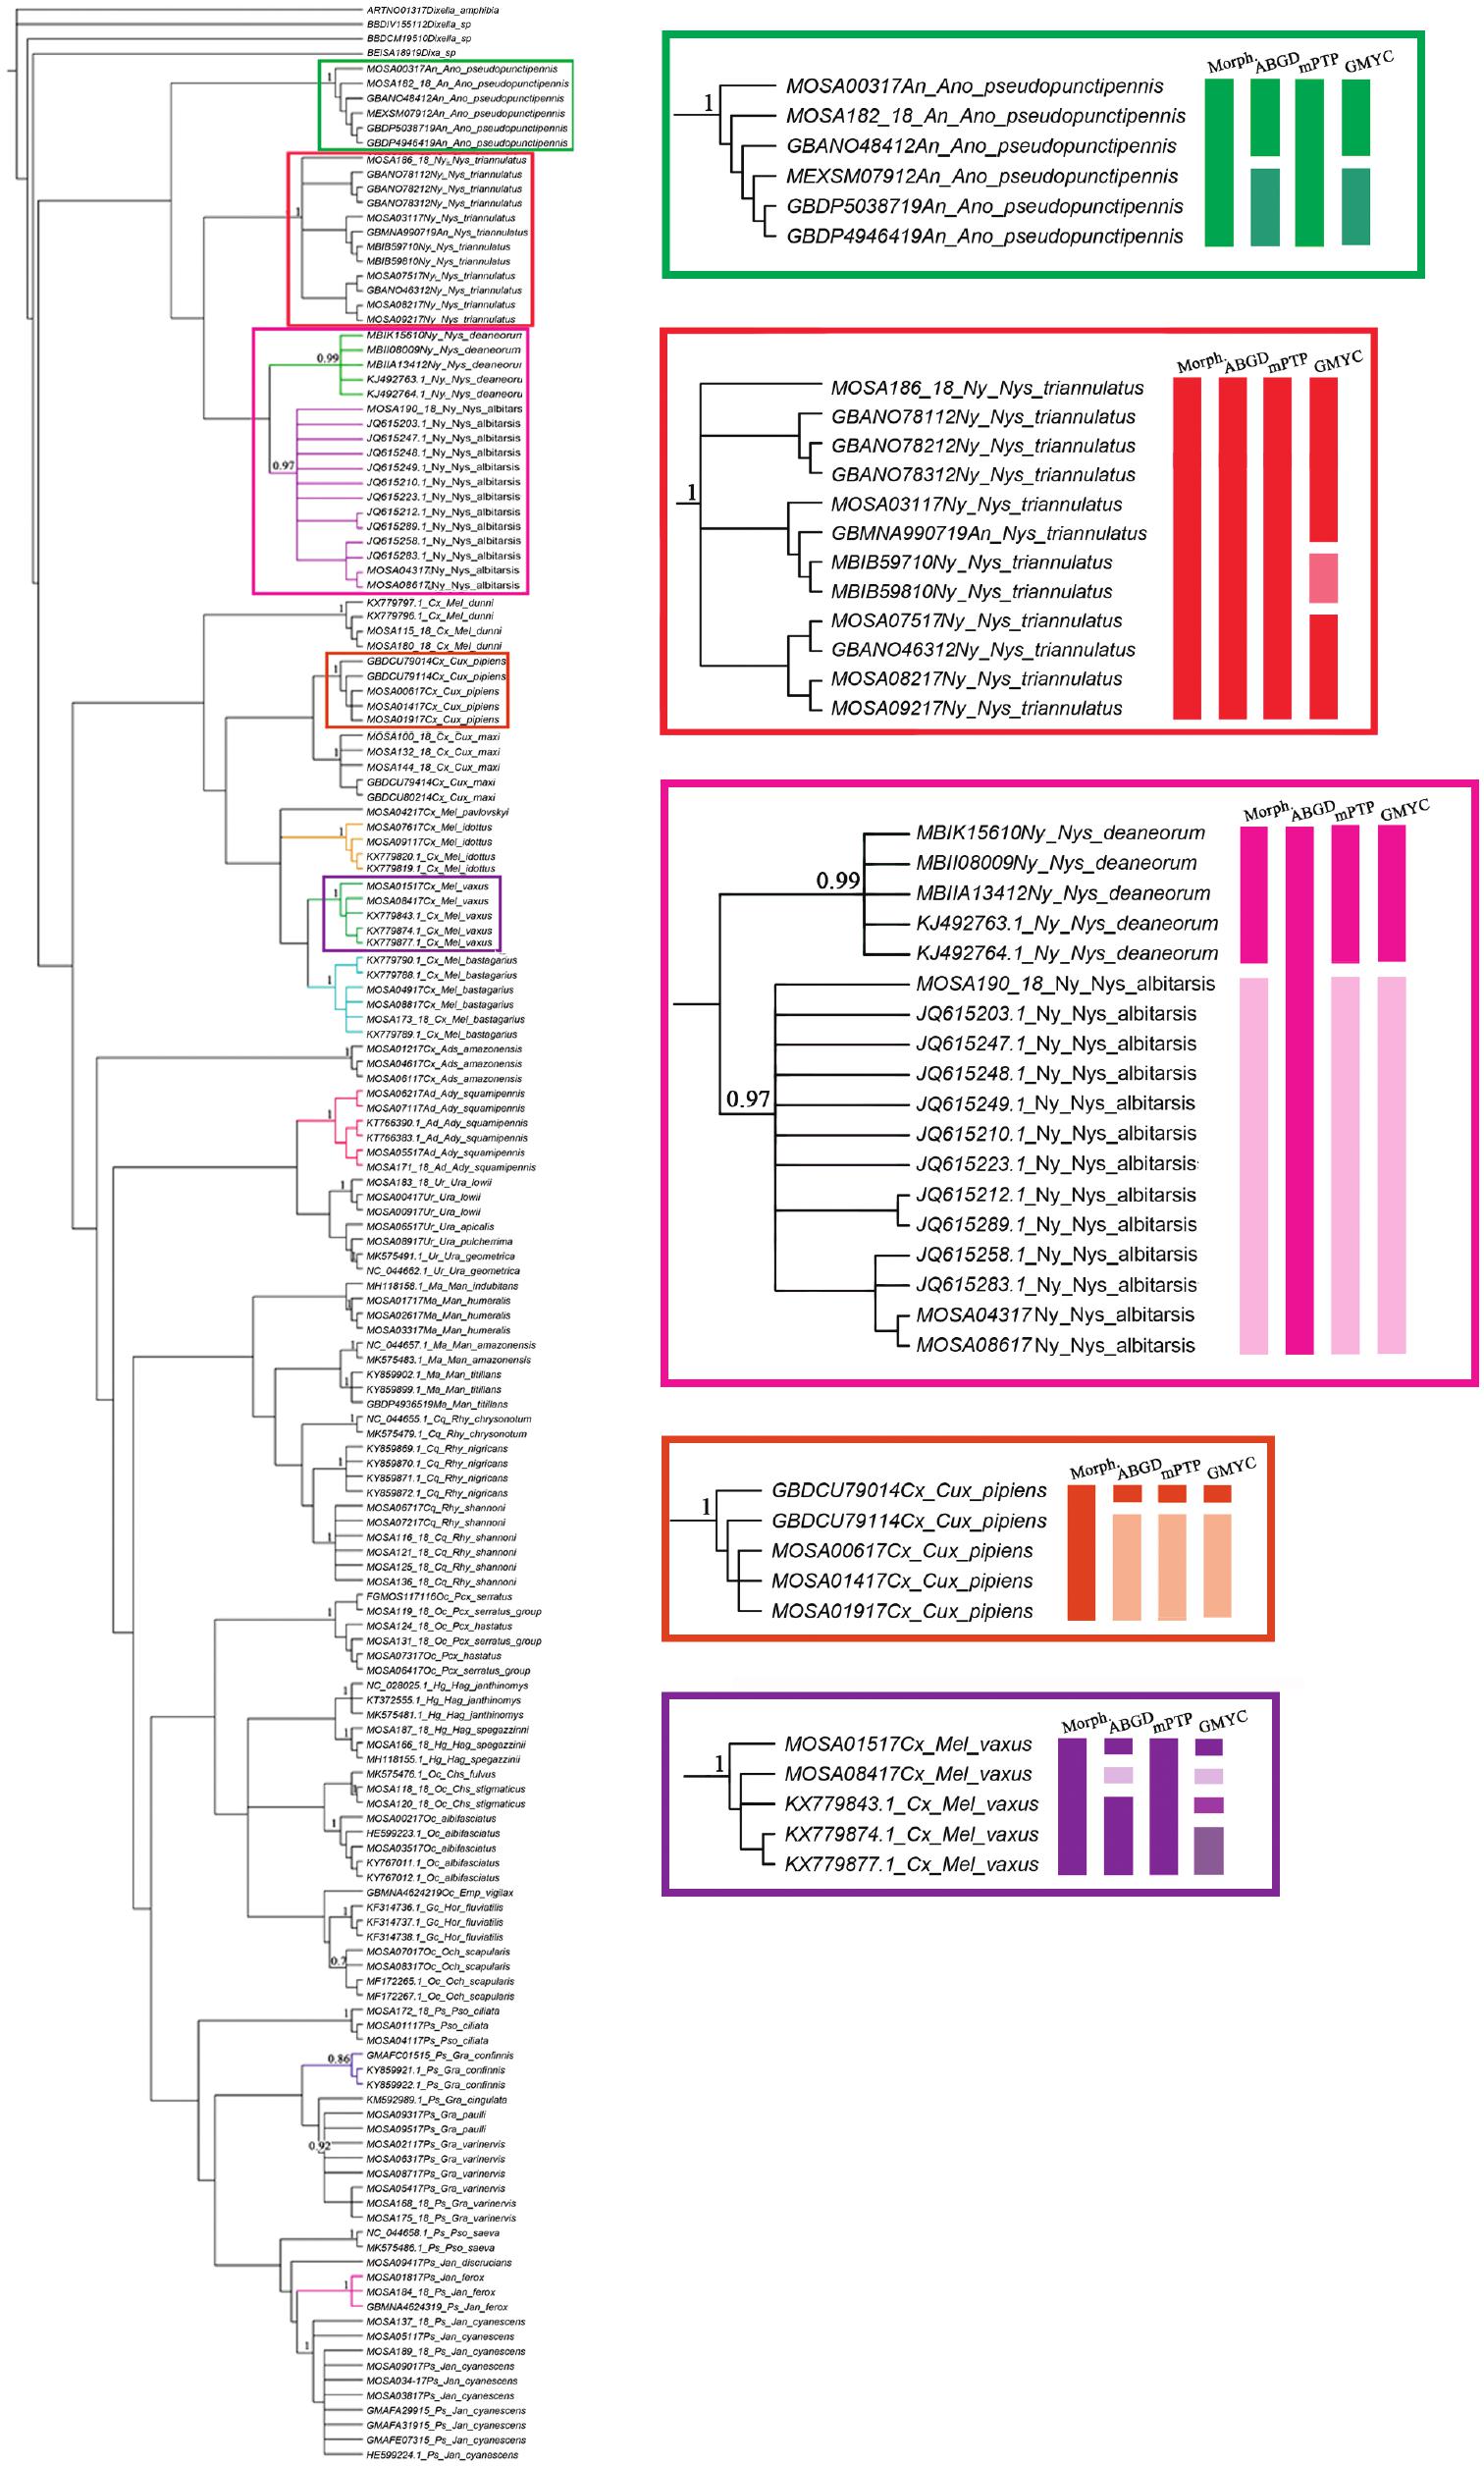 Improving the DNA Barcode Library of Mosquito Species With New Identifications and Discoveries in North-Central Argentina